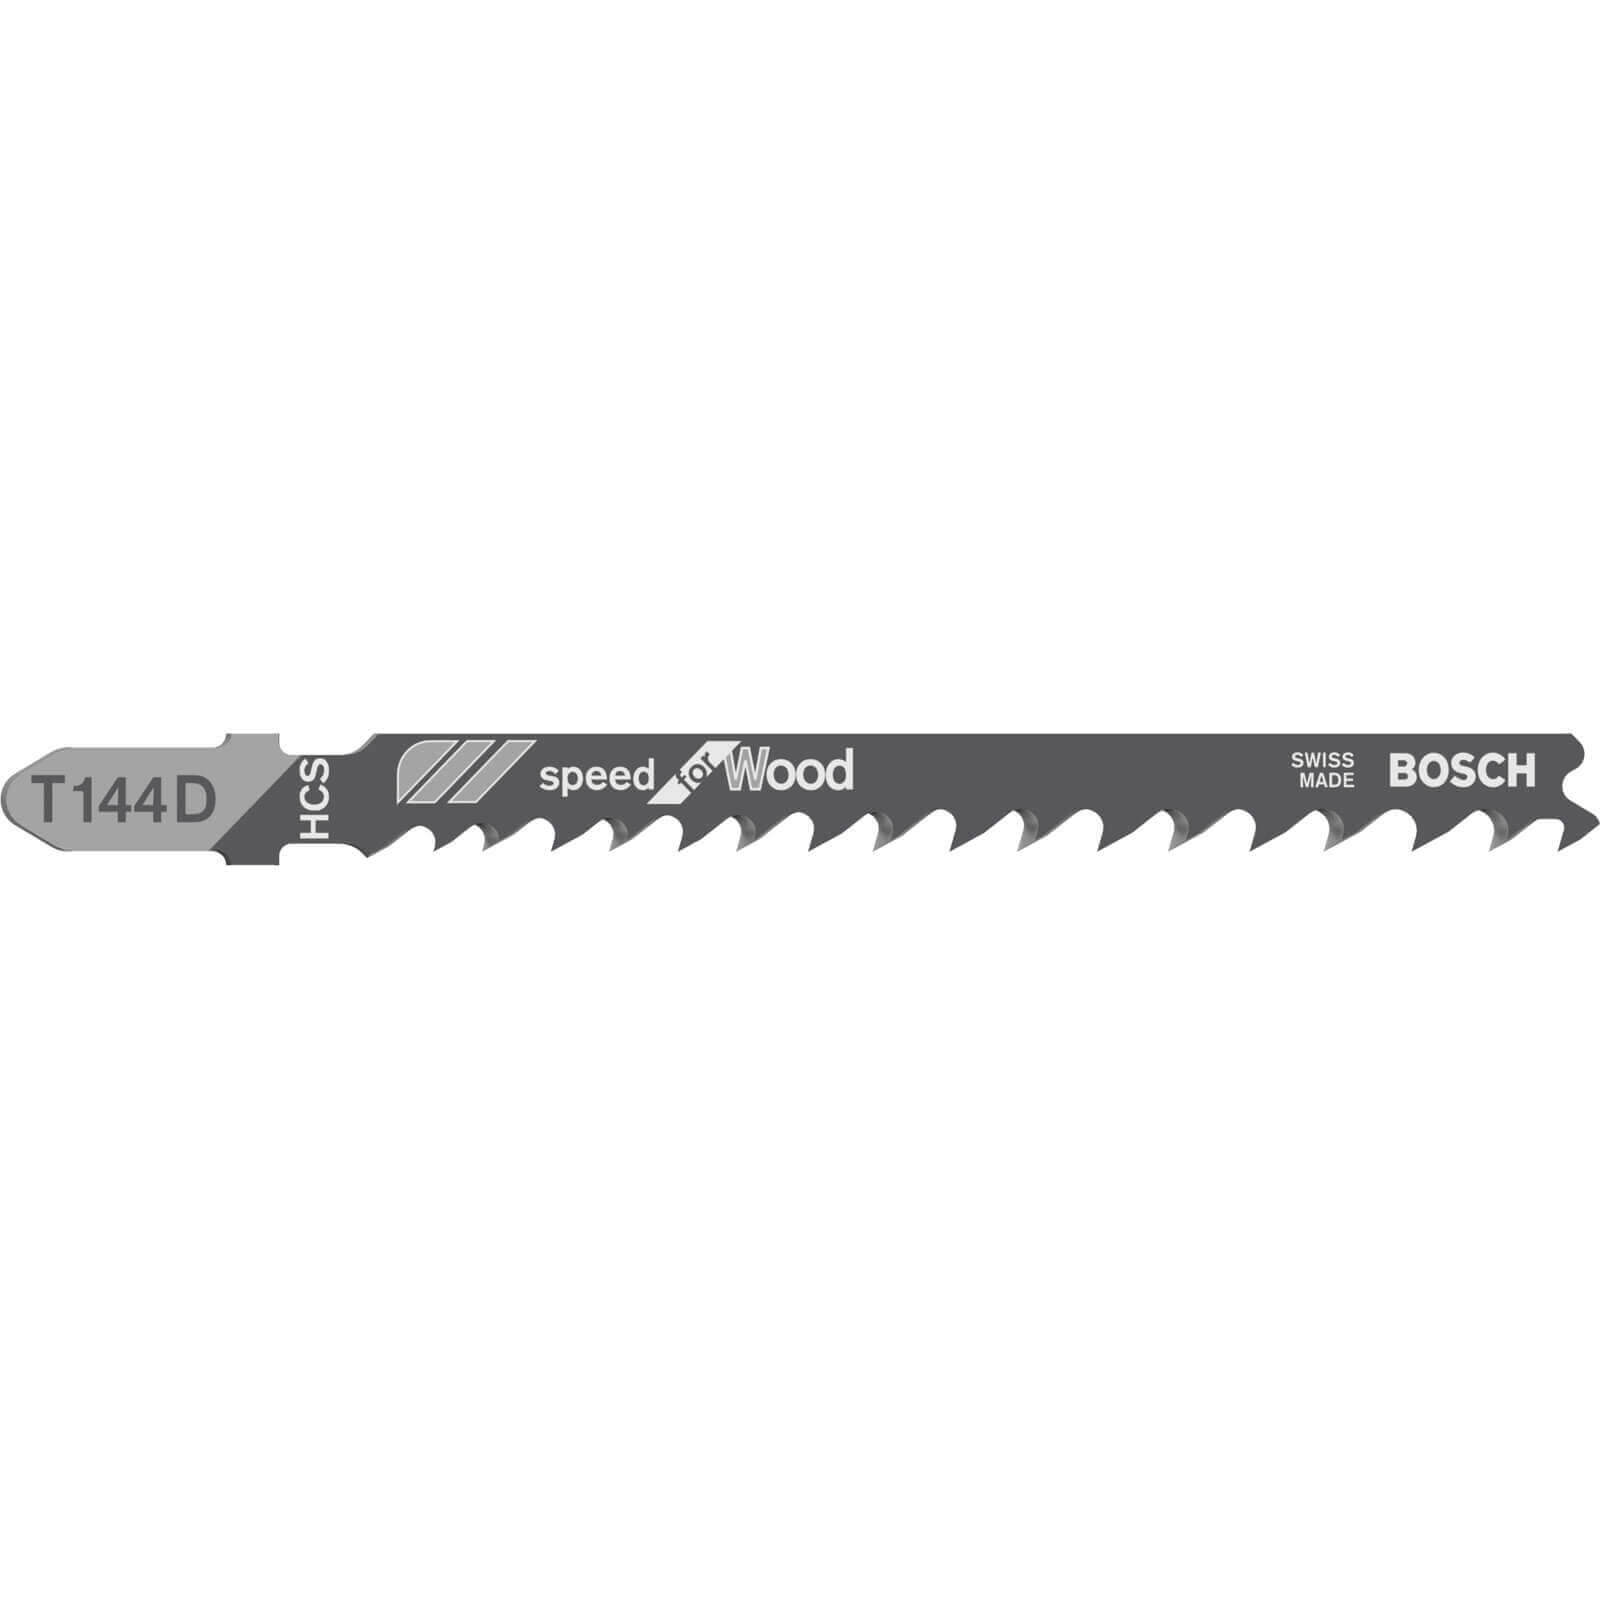 Image of Bosch T144 D Wood Cutting Jigsaw Blades Pack of 3